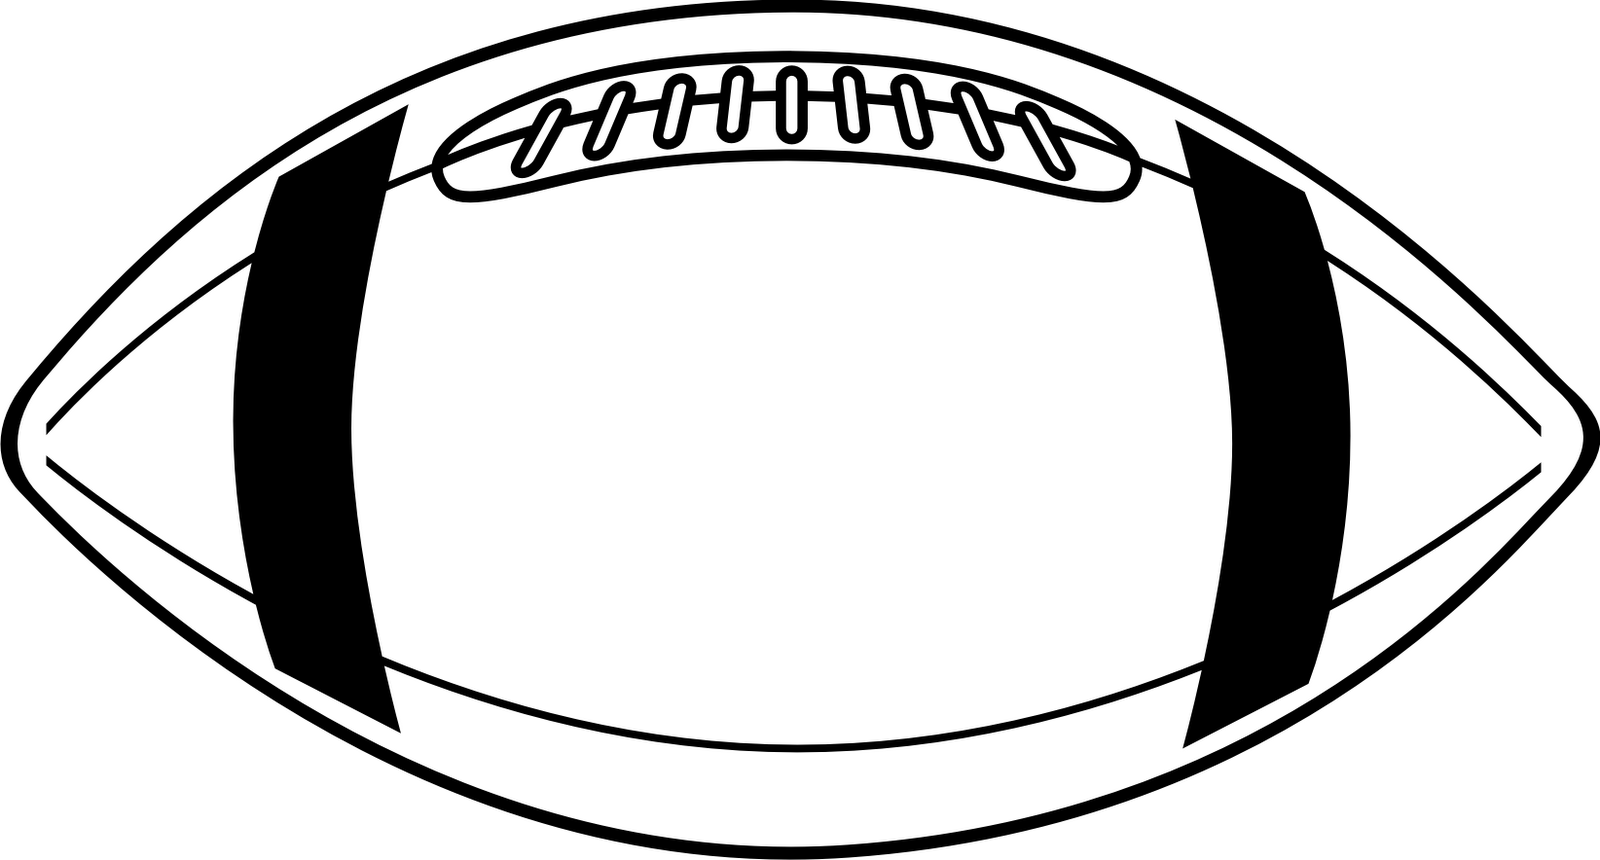 Football Clipart | Clipart Panda - Free Clipart Images